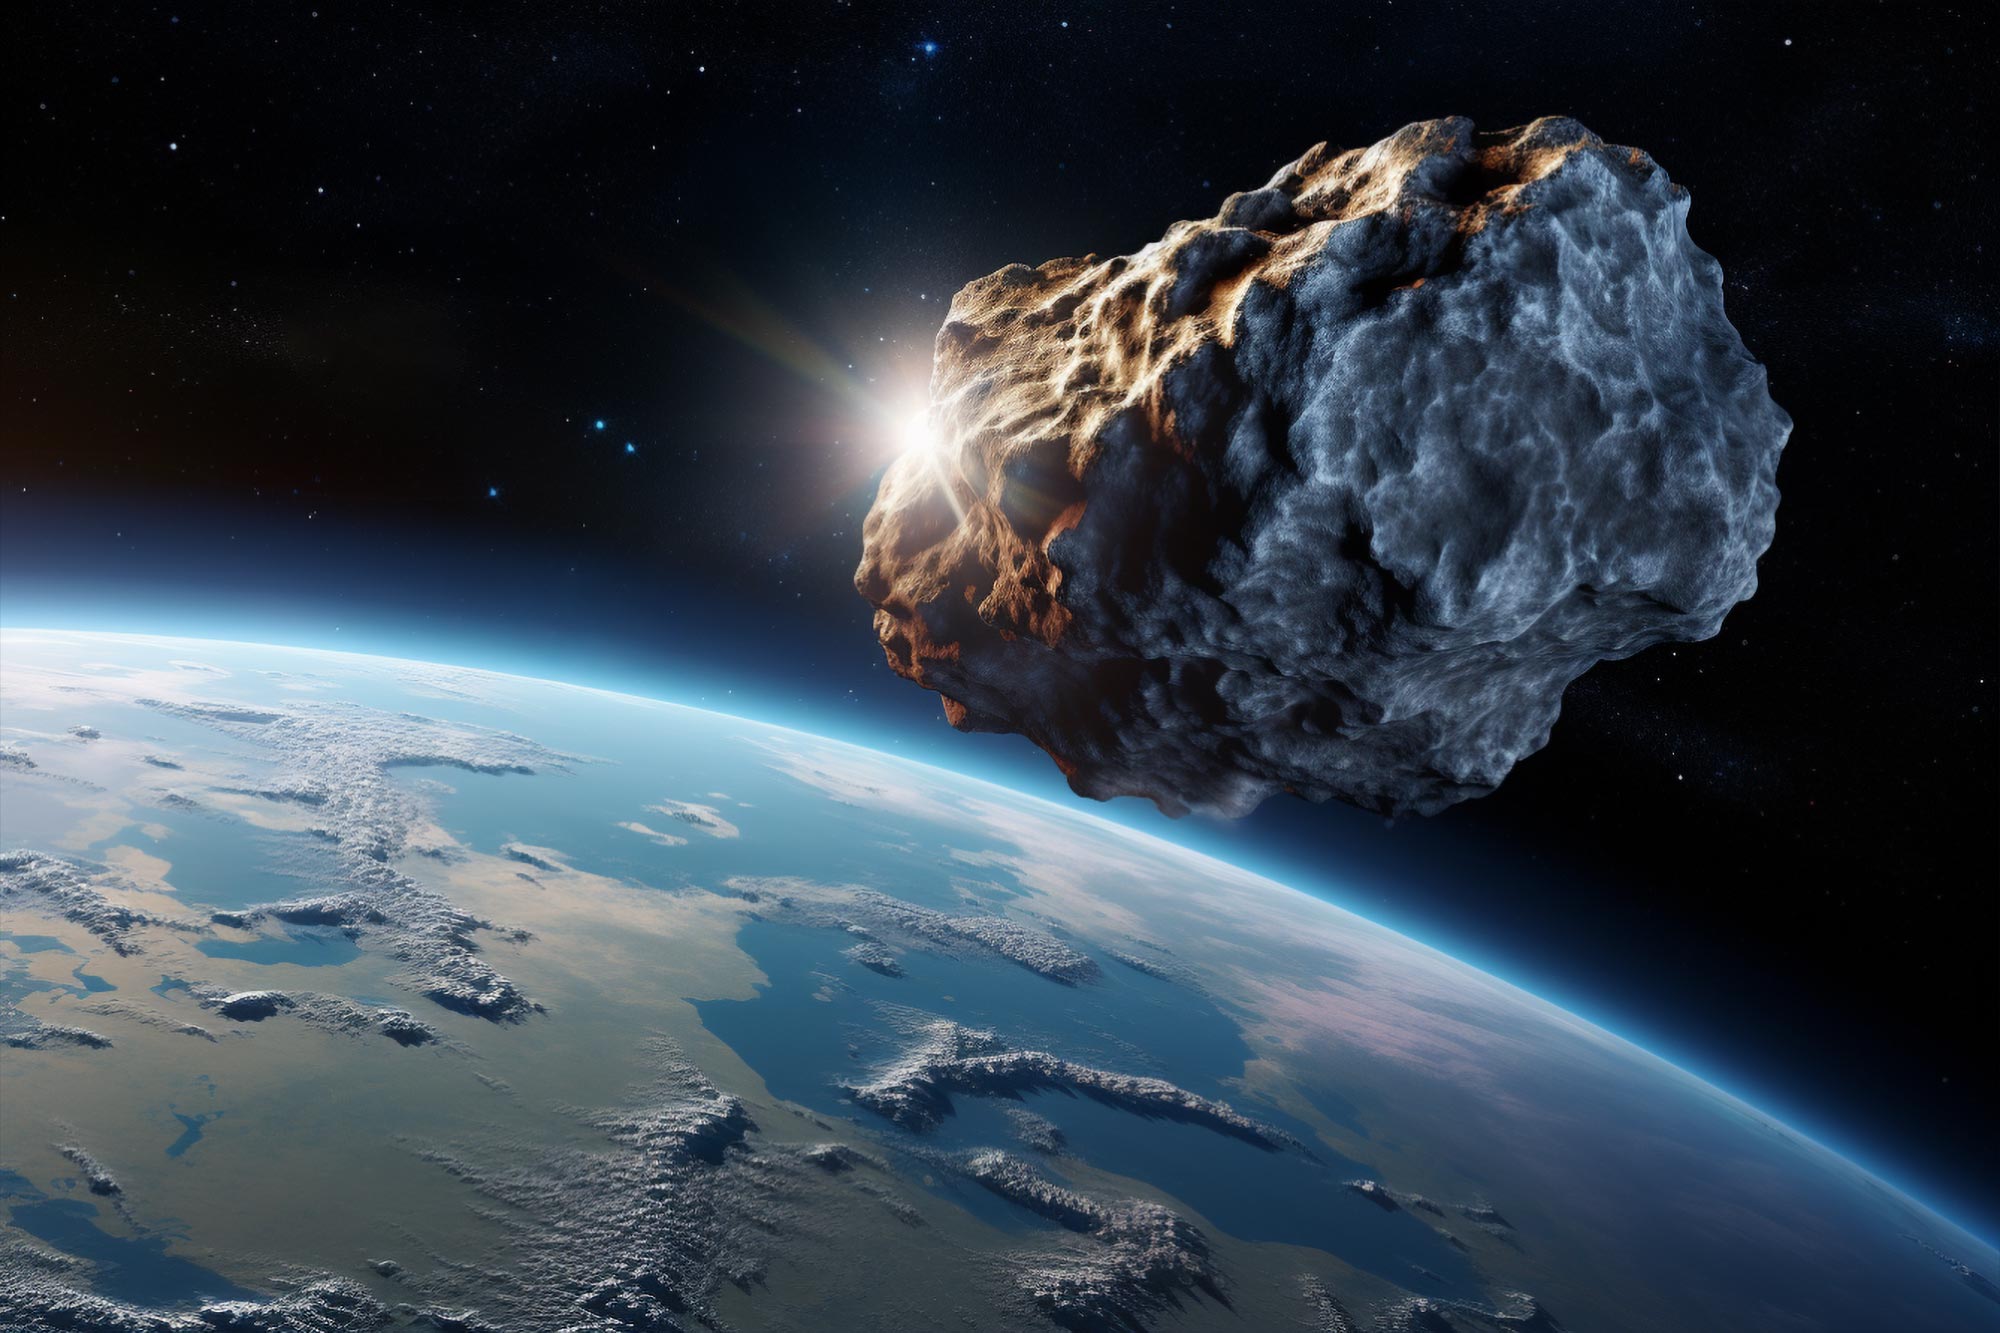 Discovery of a small asteroid on an imminent collision course with Earth